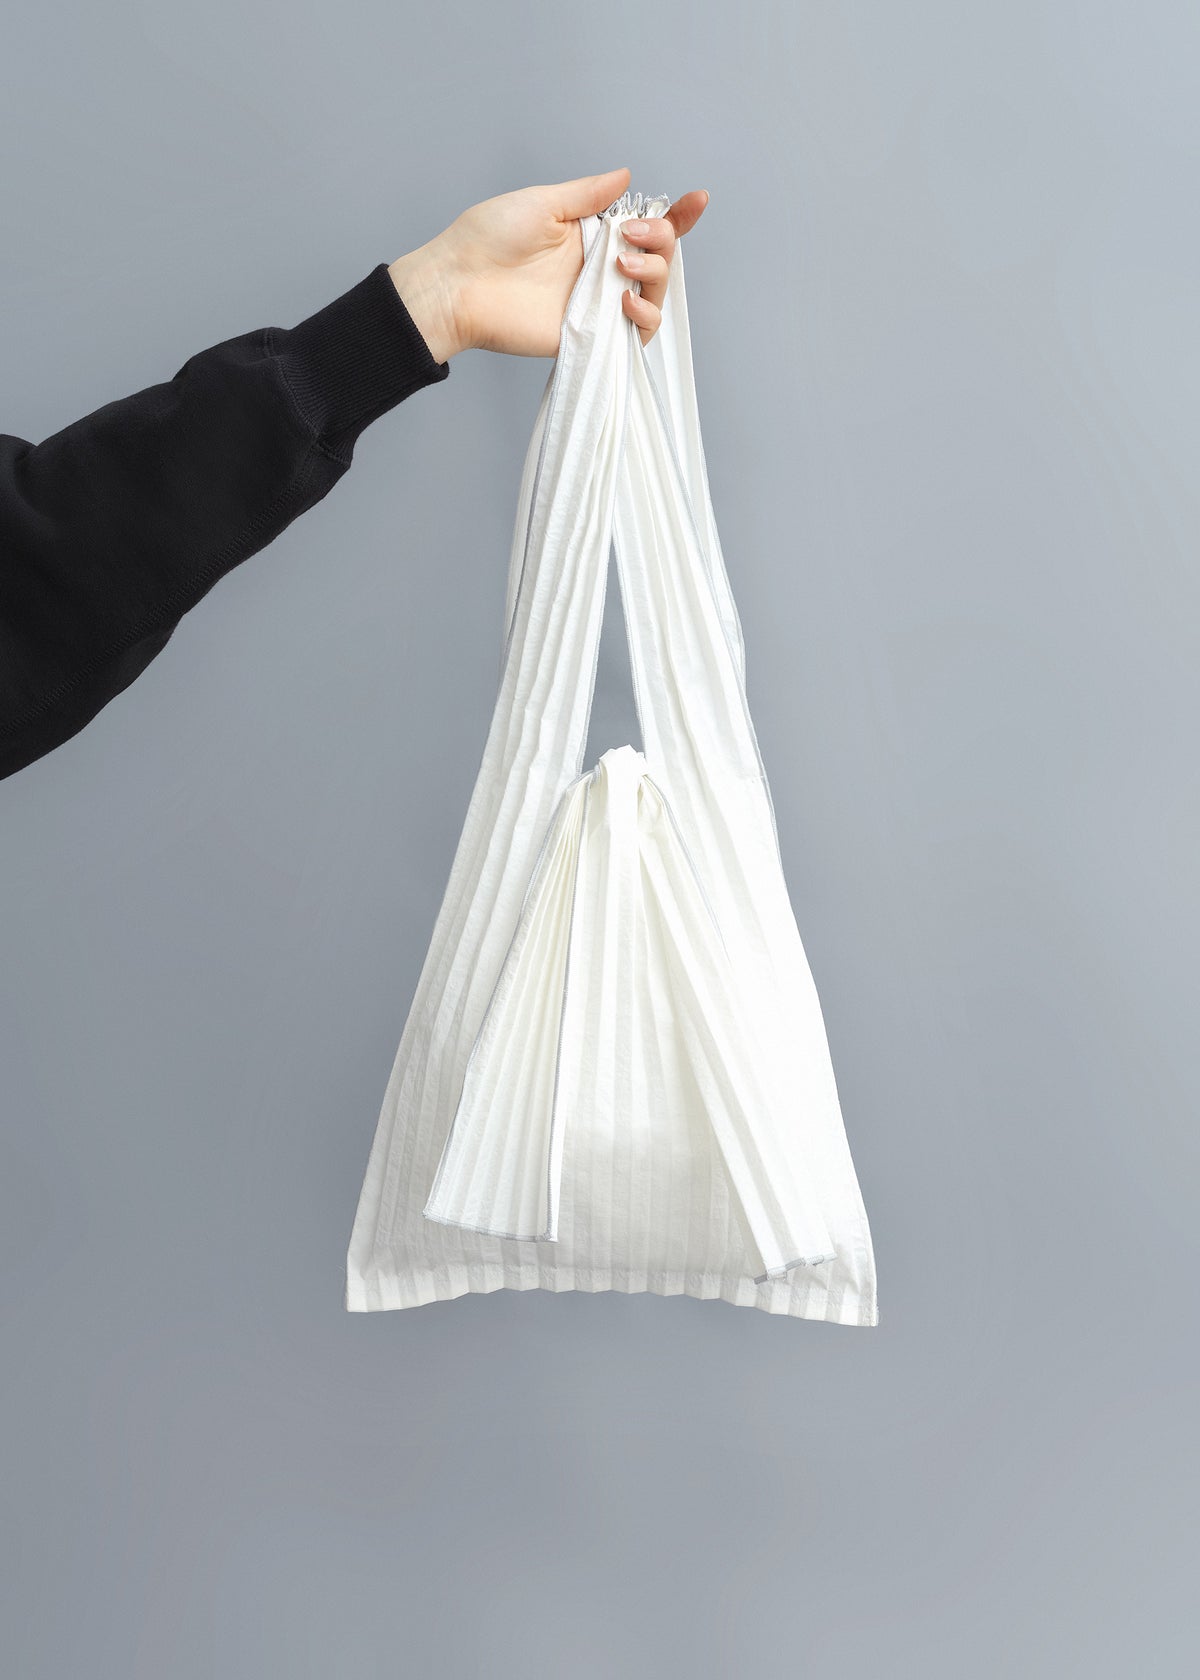 BUTOME. Small pleated bag. Plain